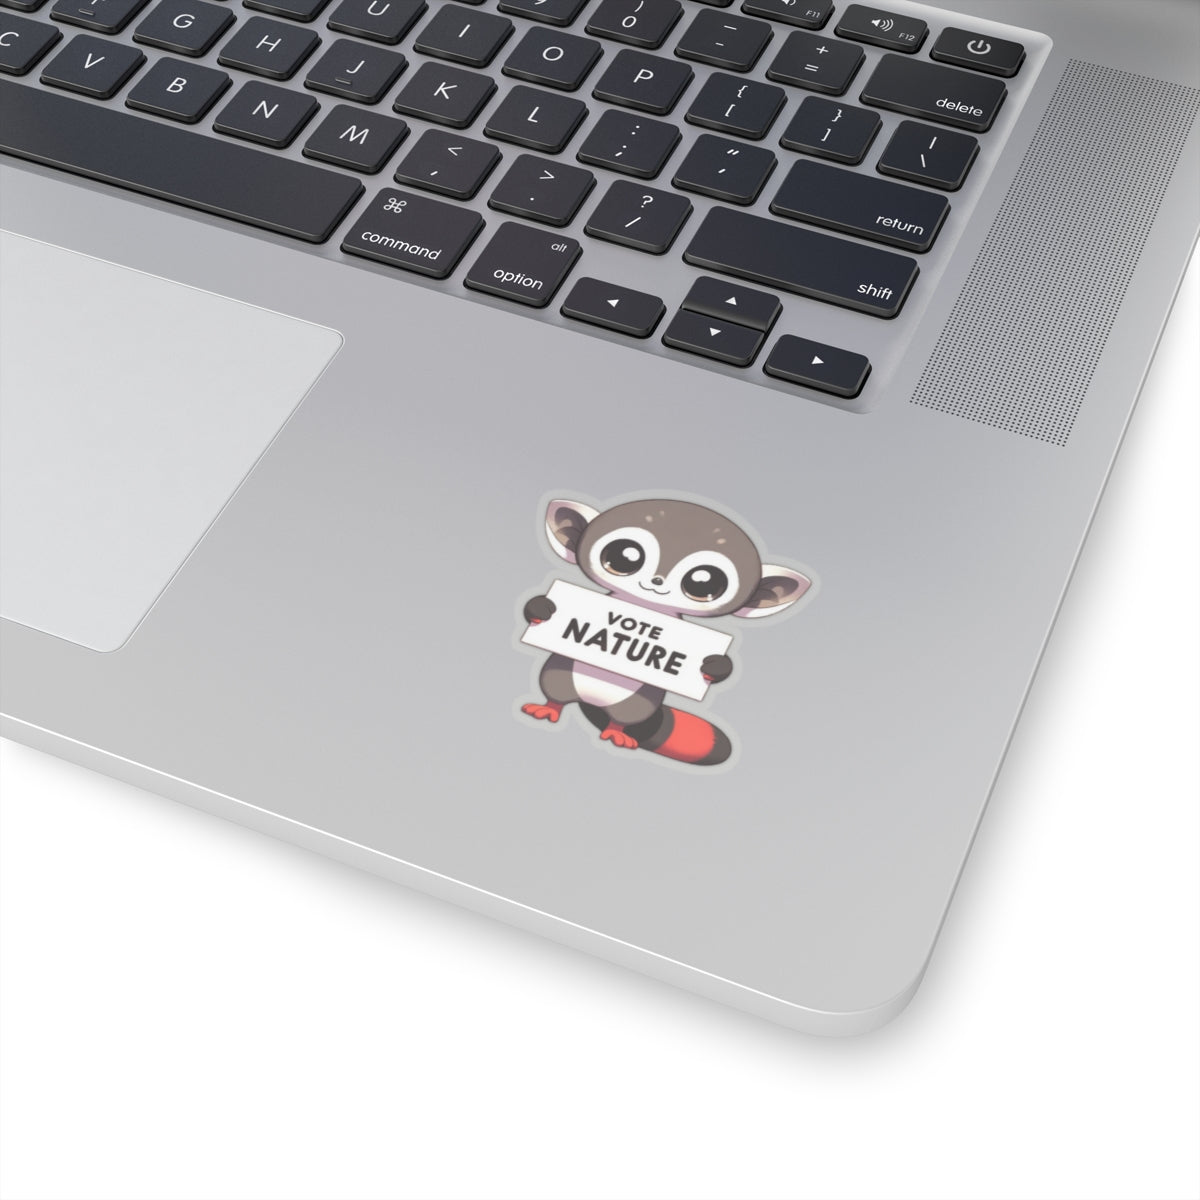 Inspirational Cute Red Shanked Douc Monkey vinyl Sticker: Vote Nature! laptop, kindle, phone, ipad, instrument case, notebook, mood board